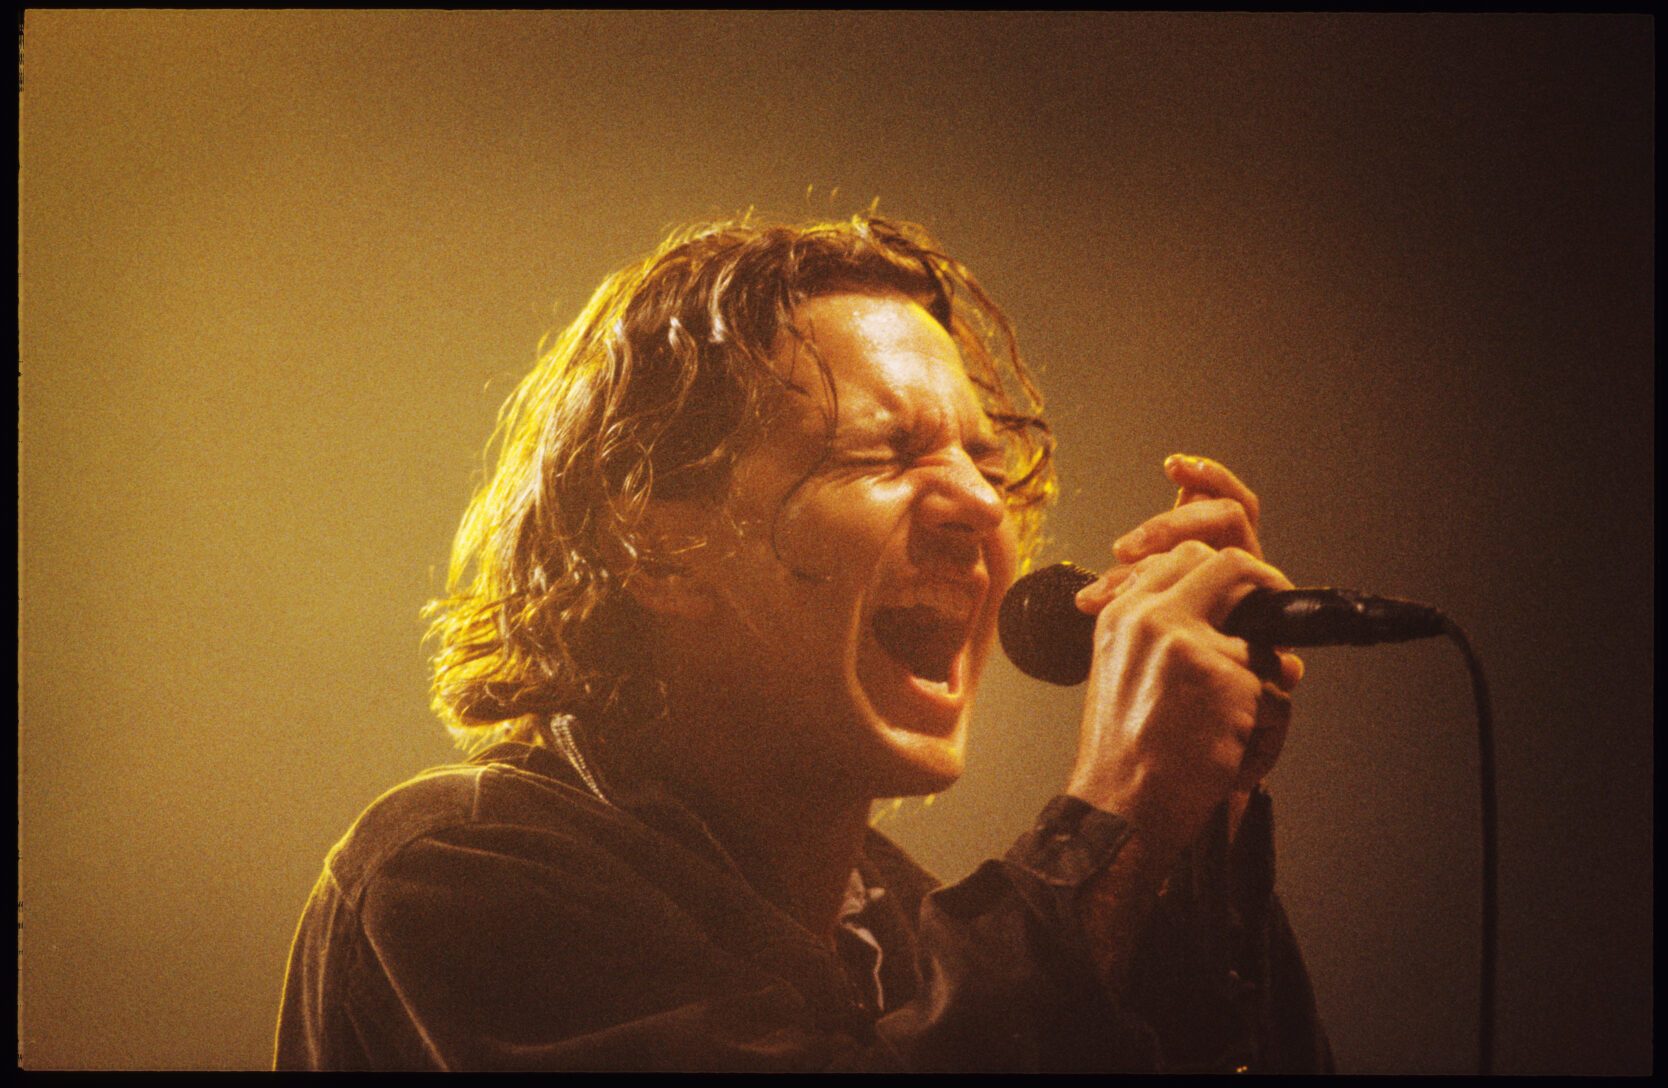 The not-so-secret but very remarkable life of Pearl Jam's first